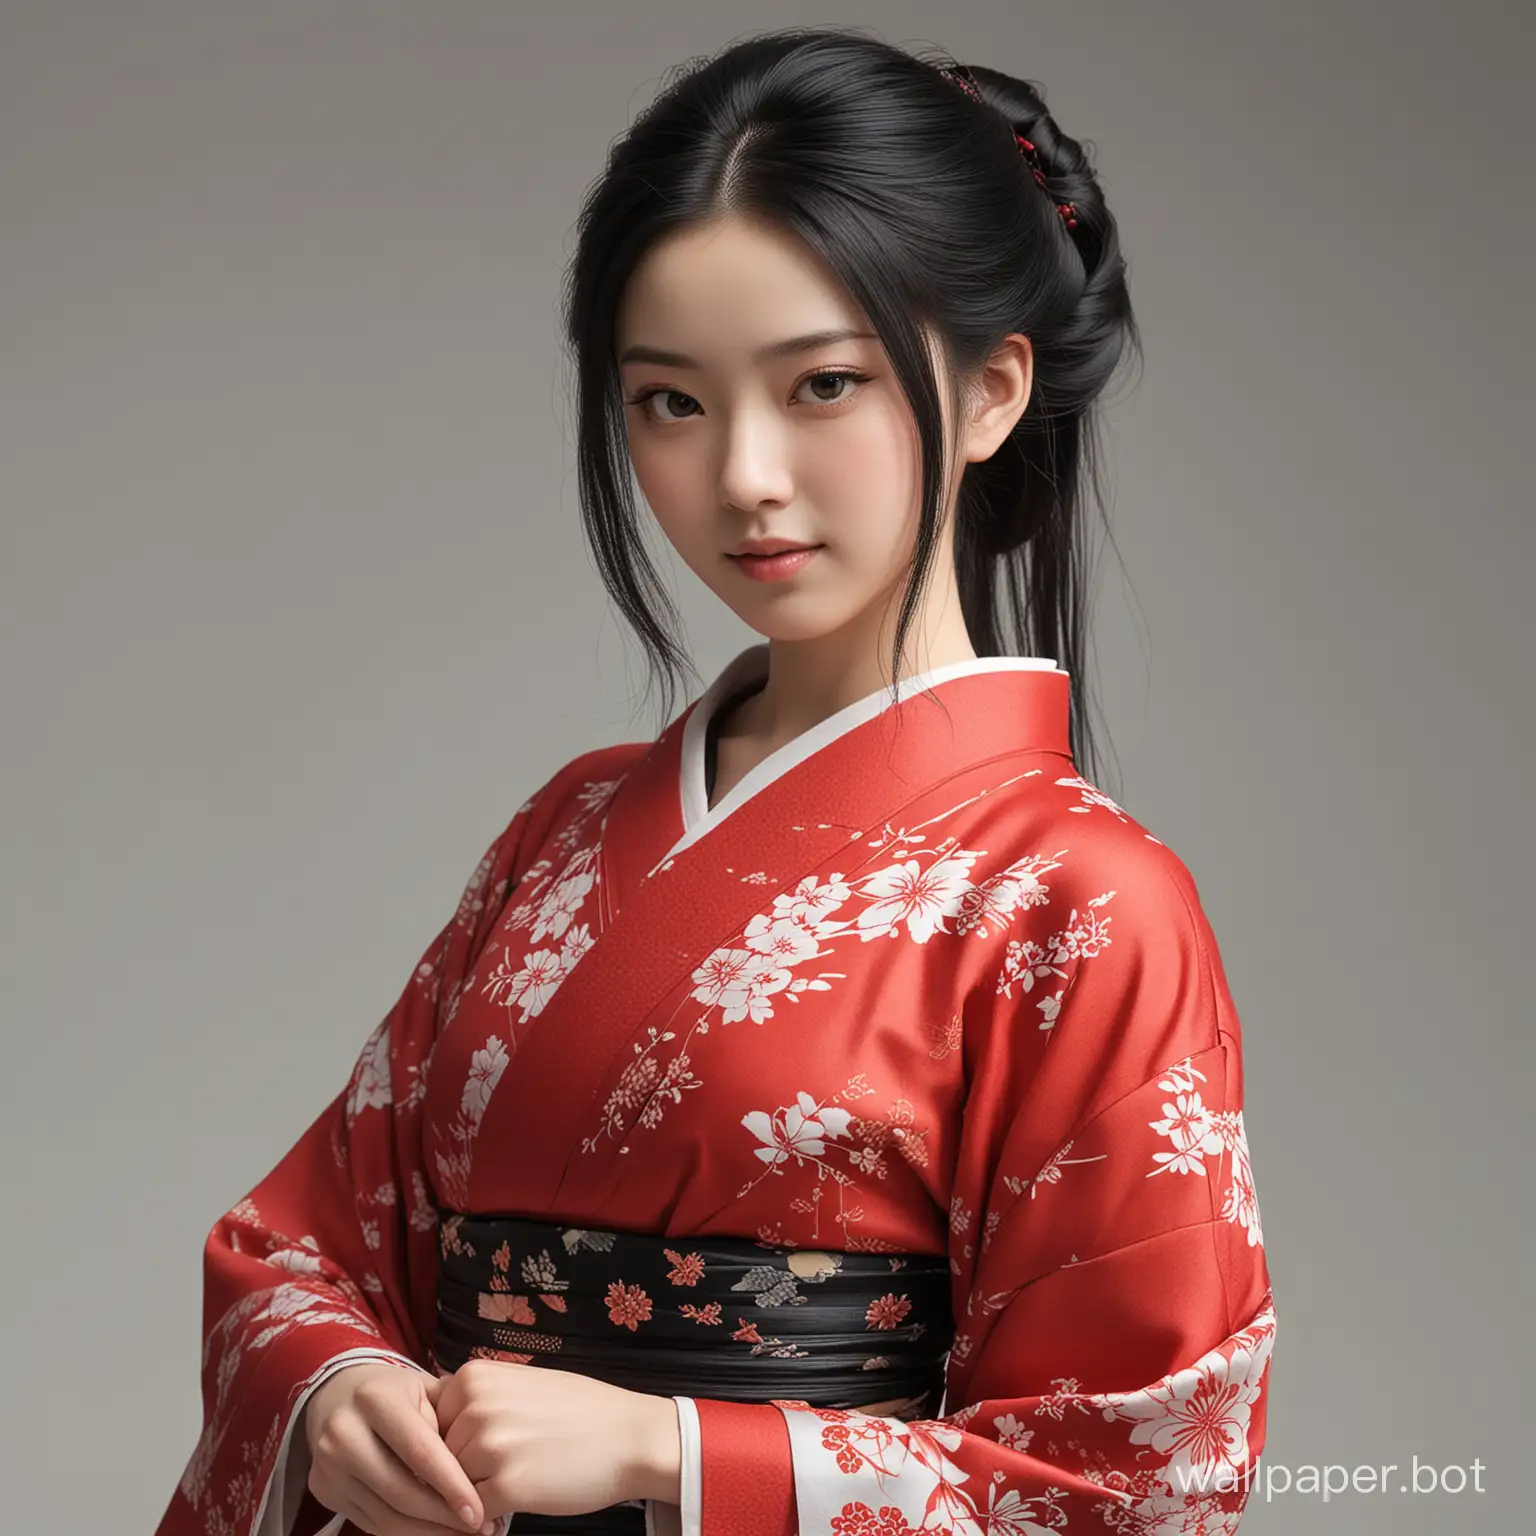 Graceful-Japanese-Girl-in-Red-Kimono-with-Porcelain-Features